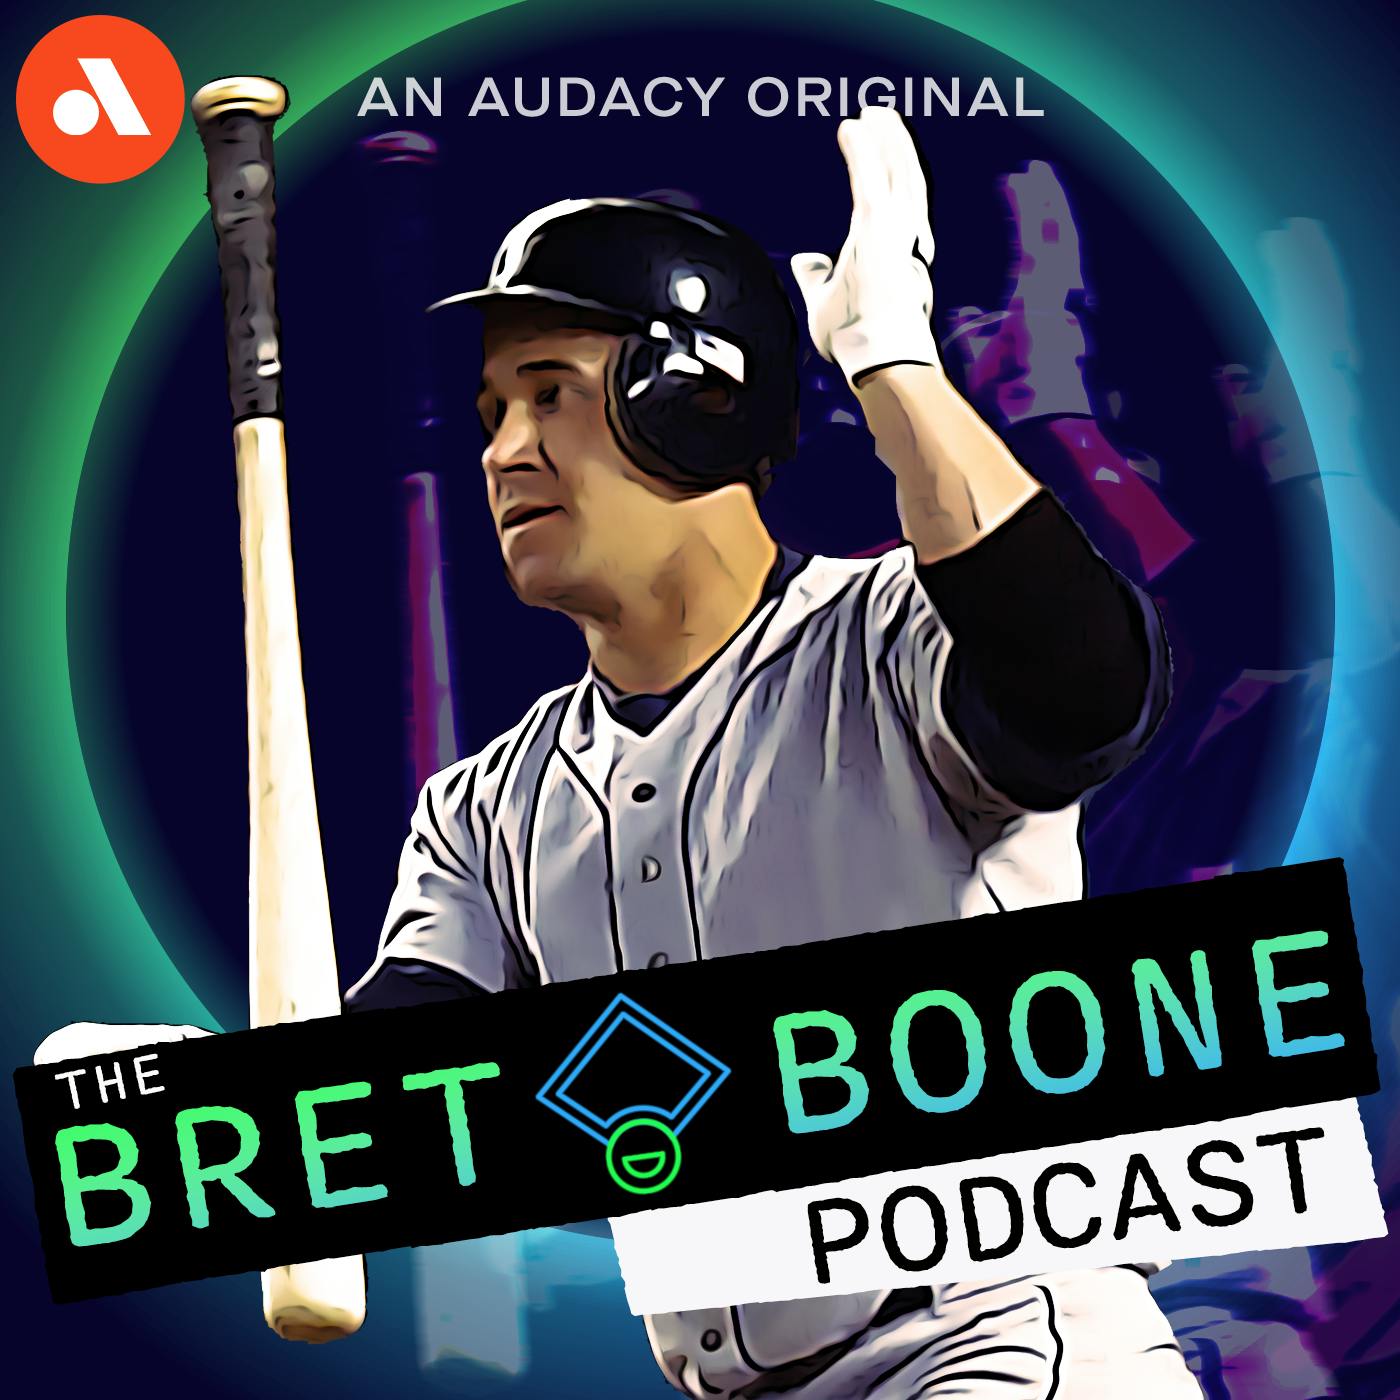 Ruben Amaro Jr. Says The Phillies Are Straight Ballers | 'The Bret Boone Podcast'